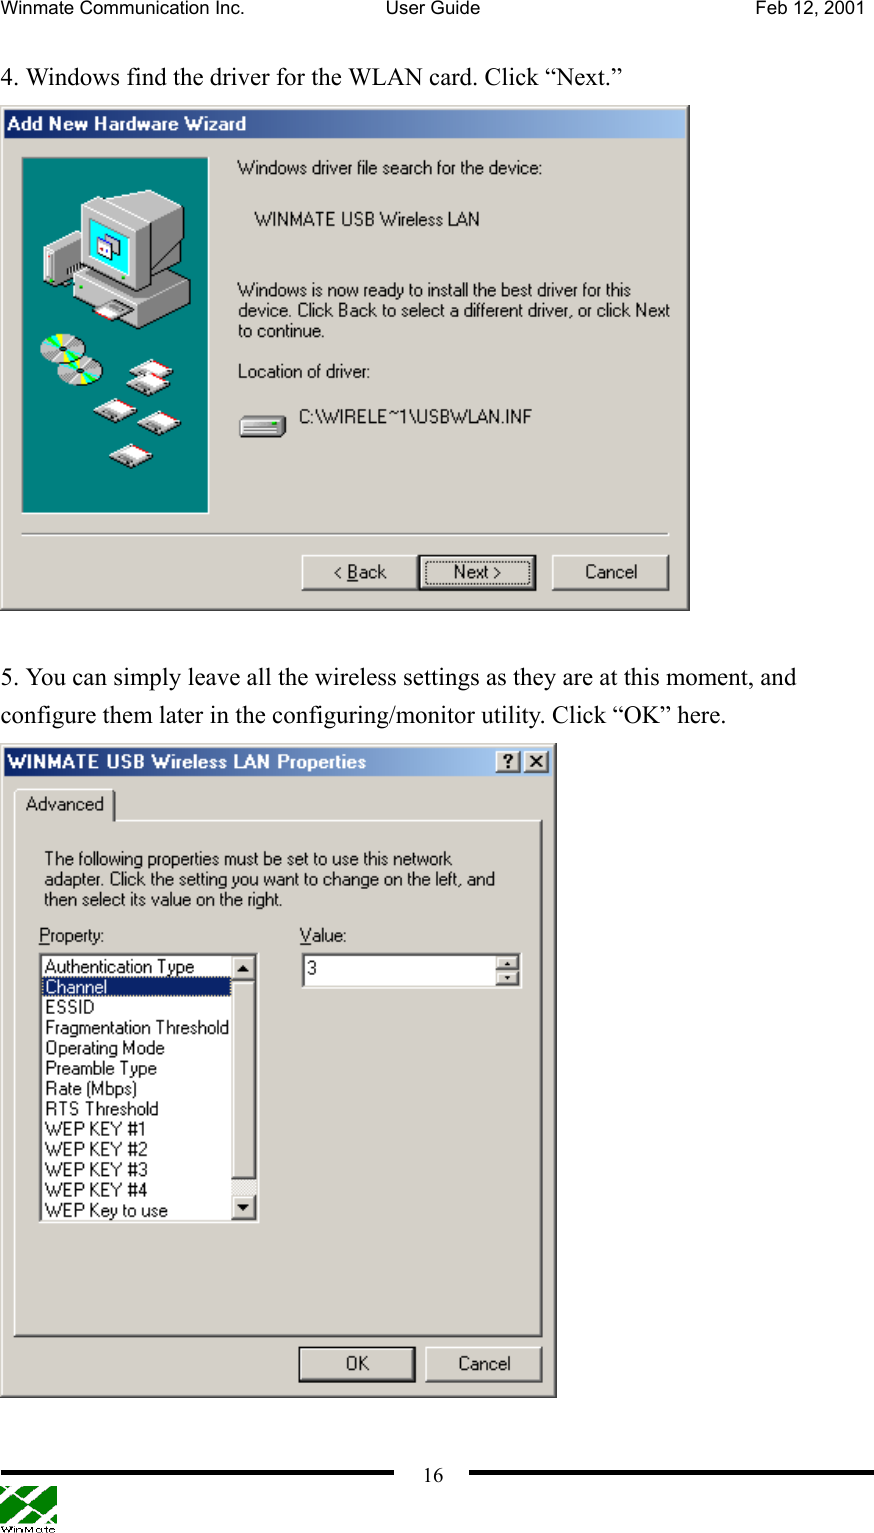 Winmate Communication Inc.  User Guide  Feb 12, 2001    164. Windows find the driver for the WLAN card. Click “Next.”   5. You can simply leave all the wireless settings as they are at this moment, and configure them later in the configuring/monitor utility. Click “OK” here.  